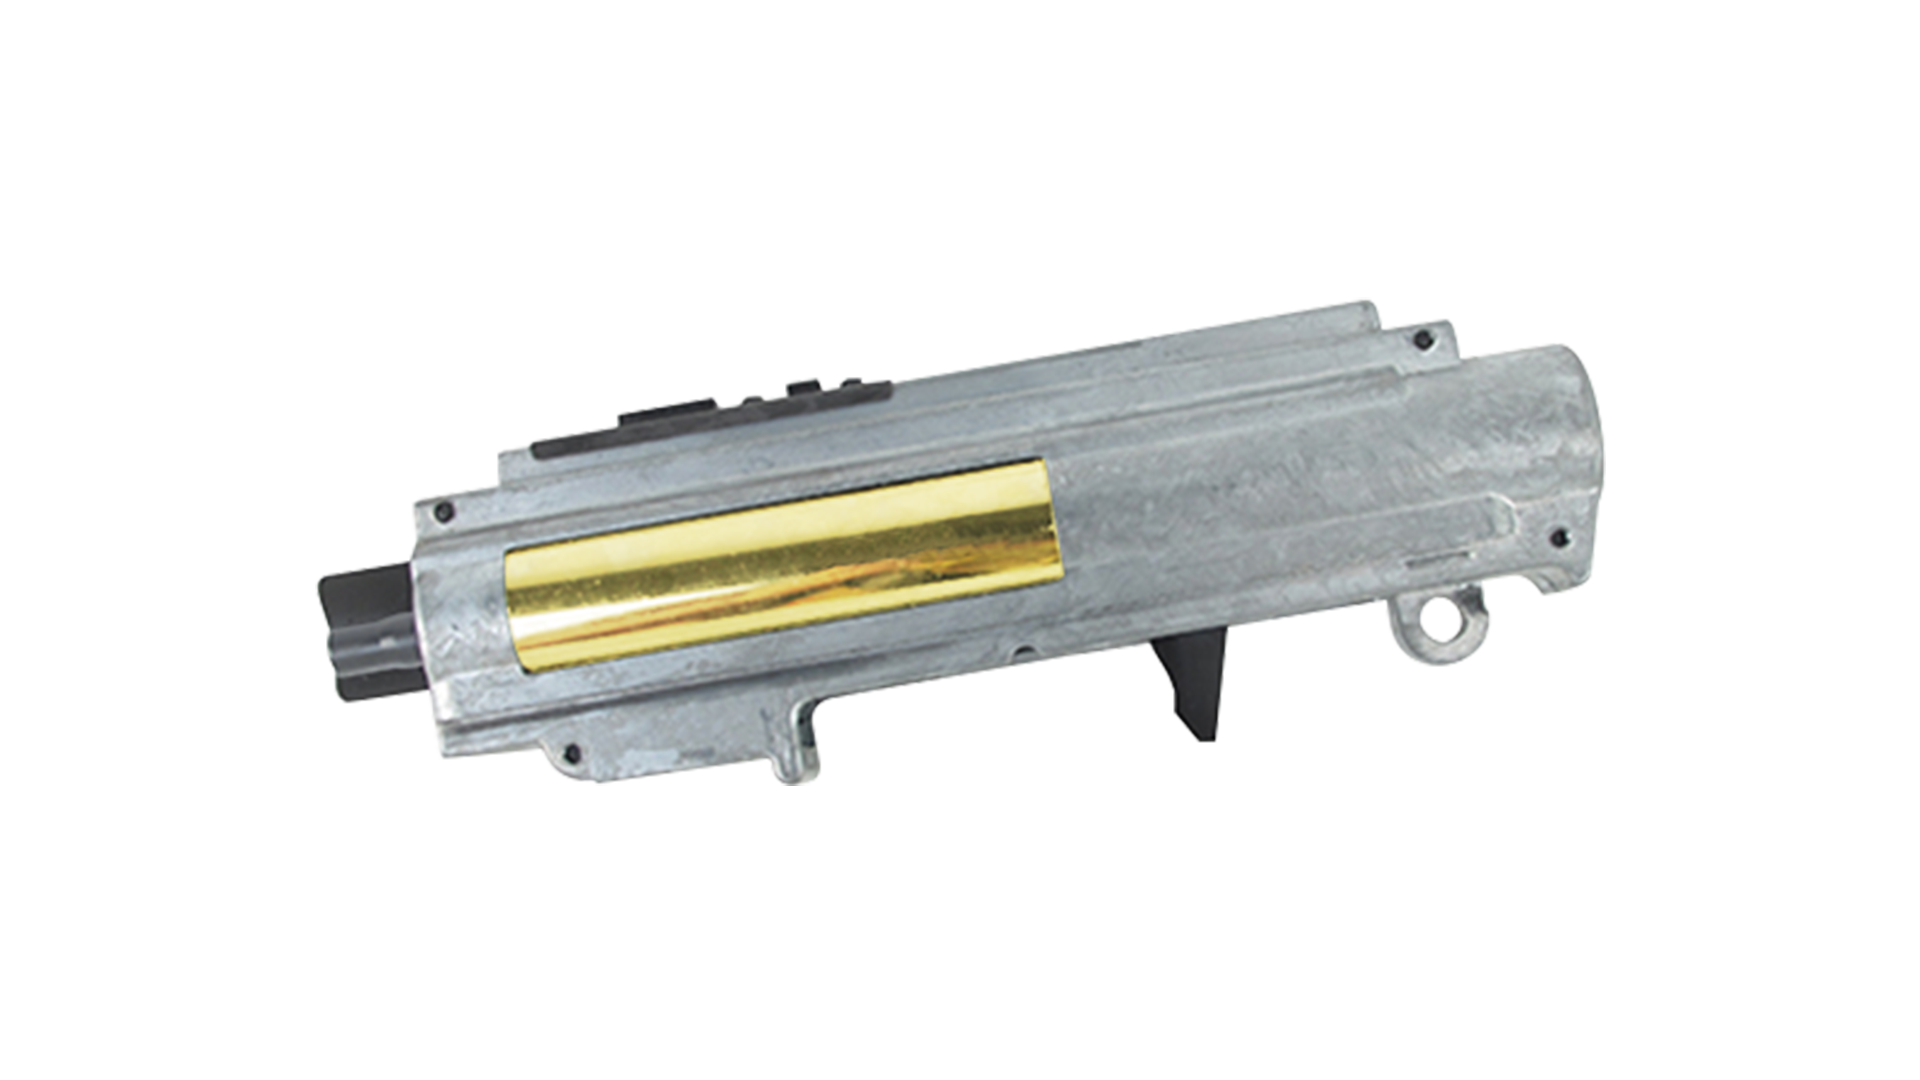 【MA-525A】Master Mod Ready CS4/CXP EBB Upper Gearbox (Full Capacity Cylinder/M120 Spring)